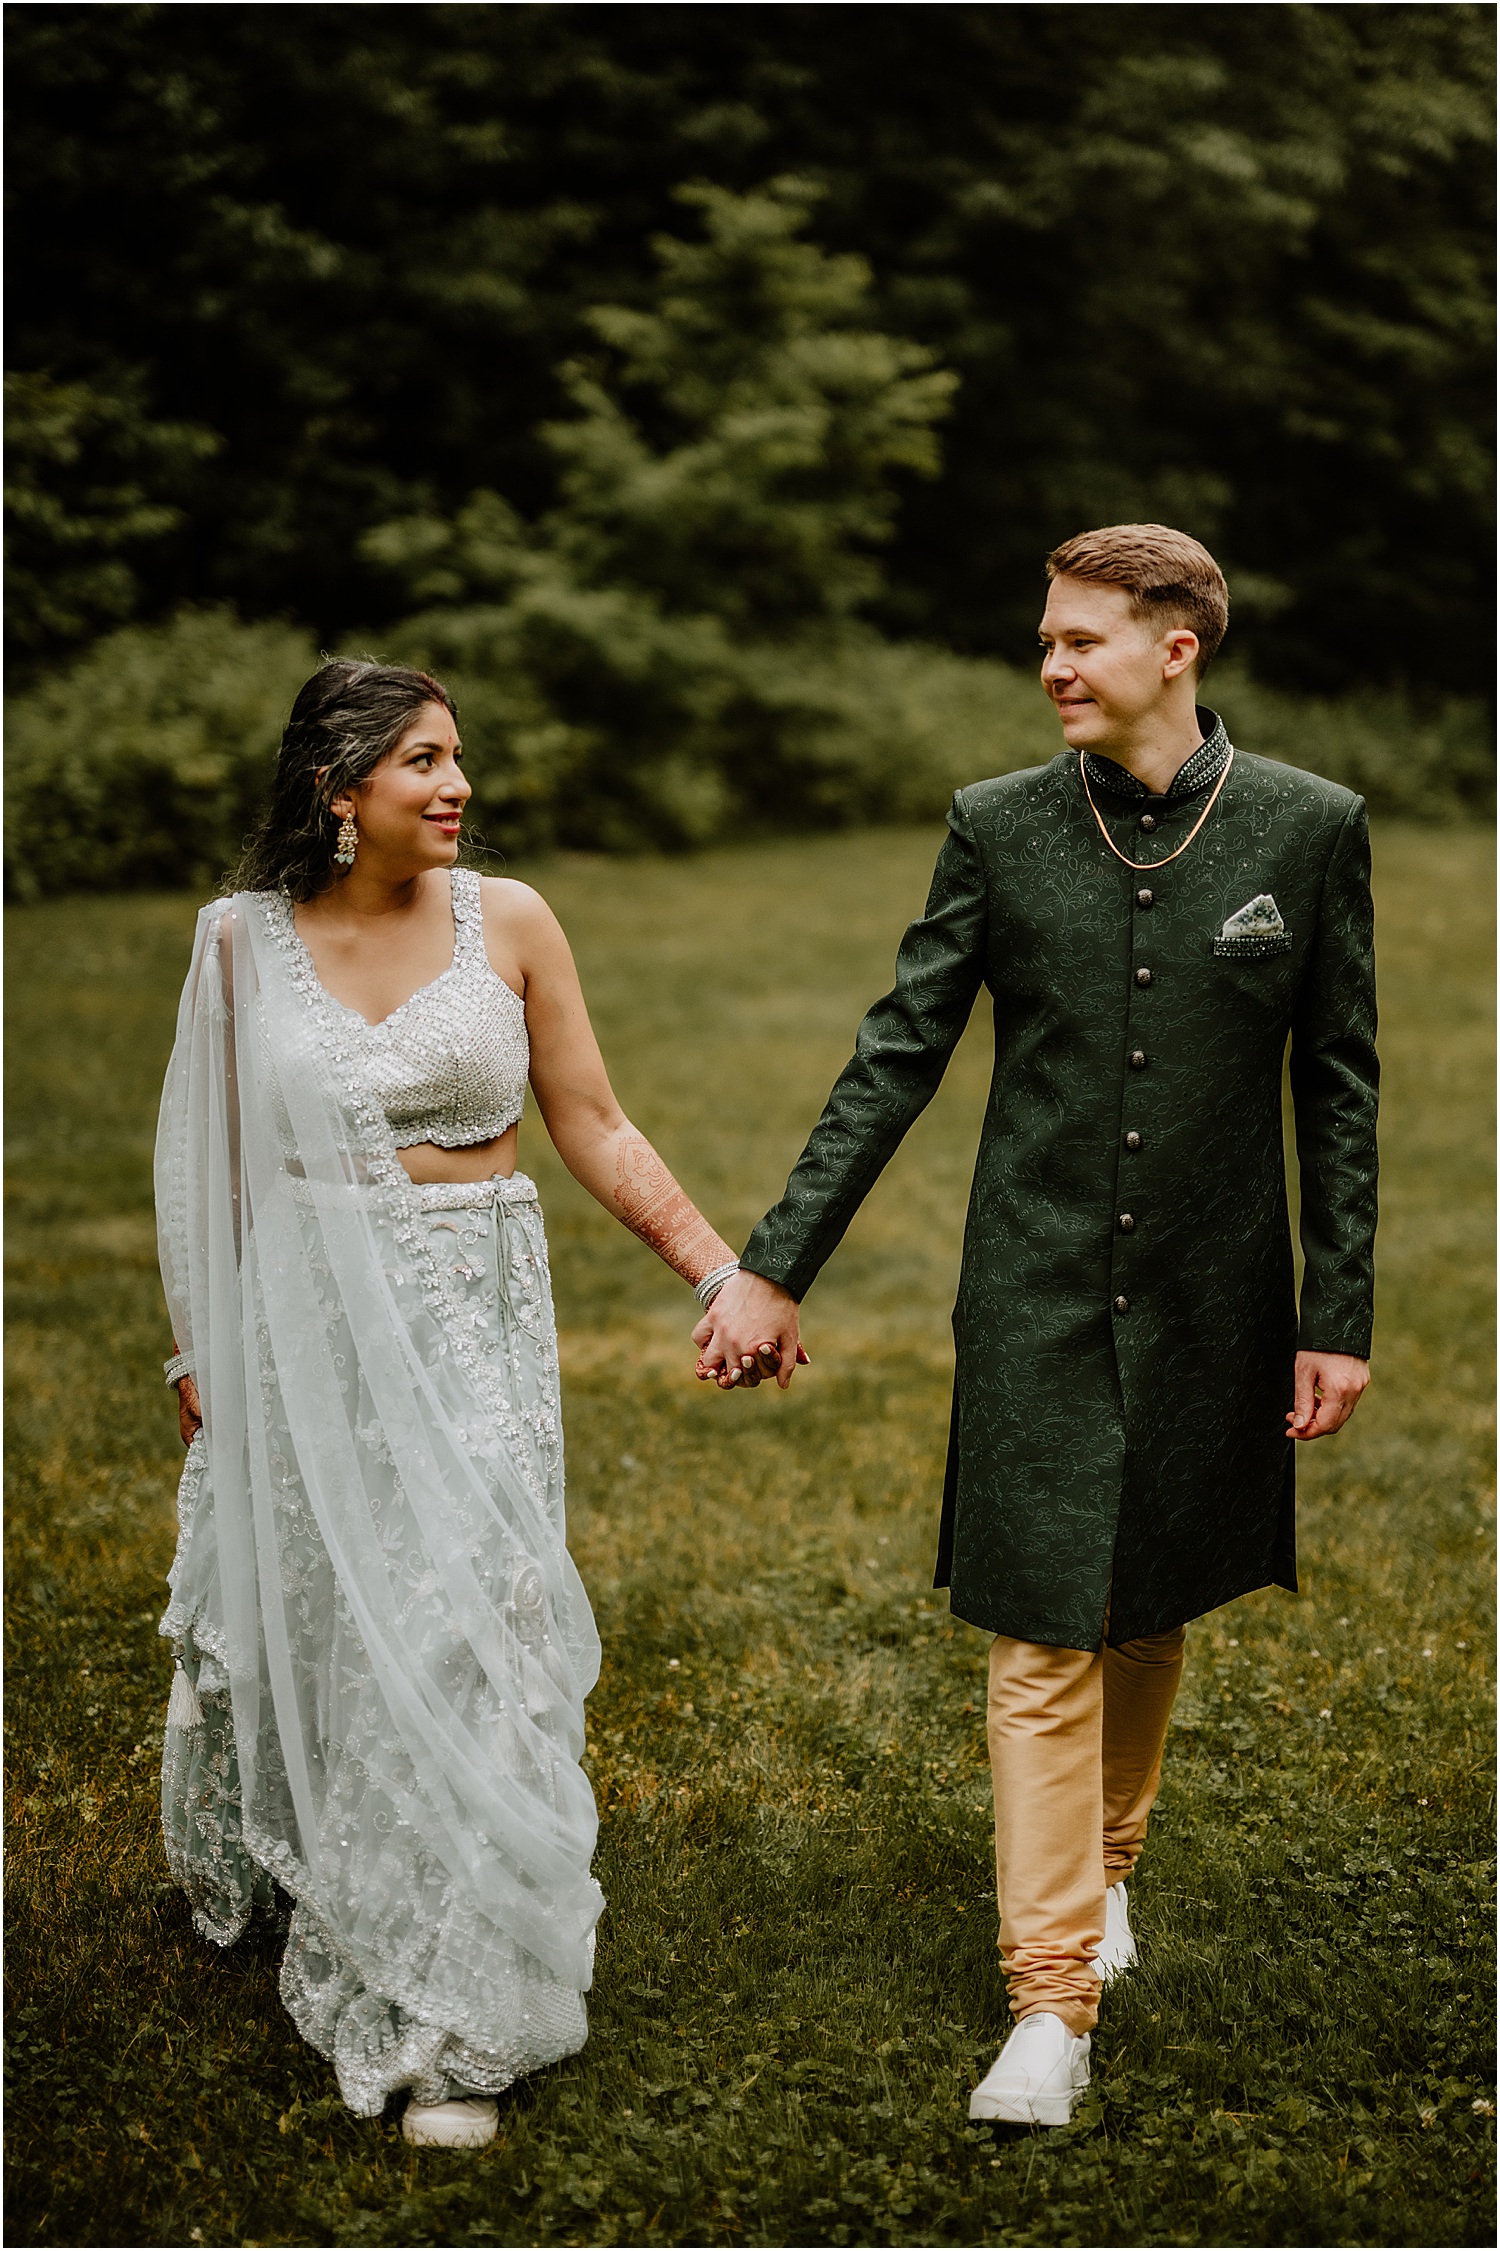 Bride and groom walk hand in hand together for Katelyn Mallett Photography